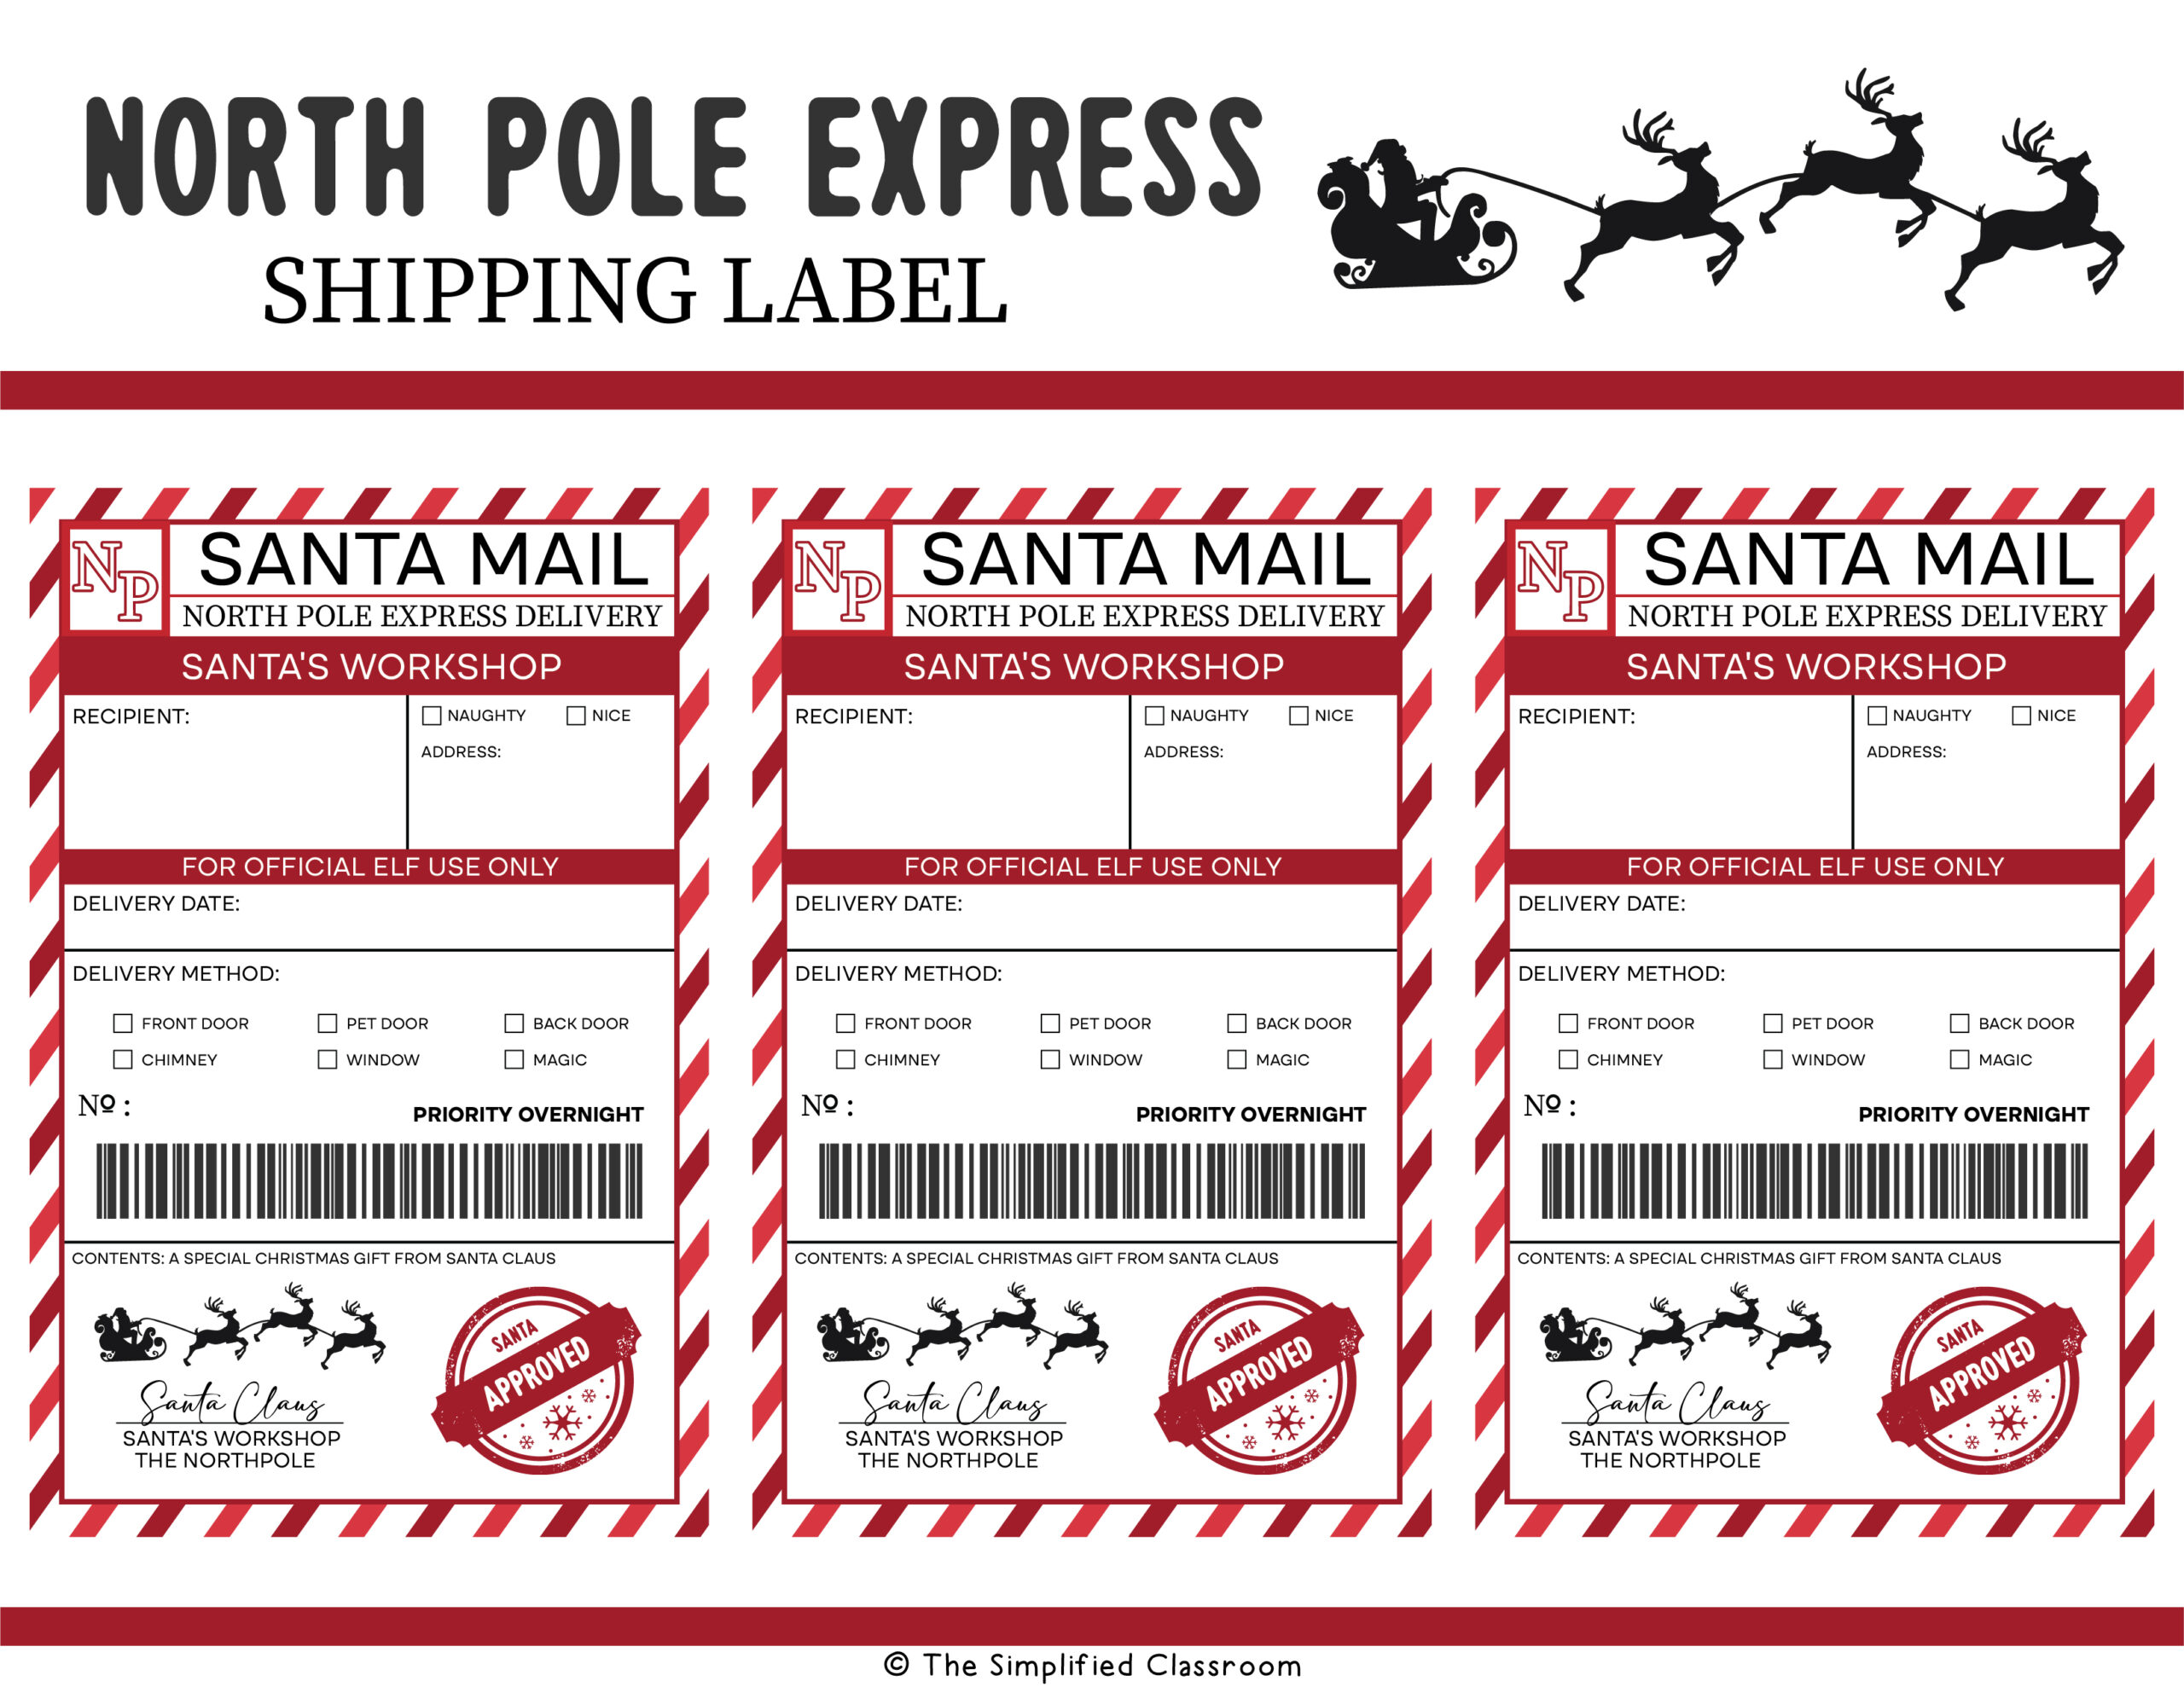 North Pole Shipping Labels and Stamps – The Simplified Classroom